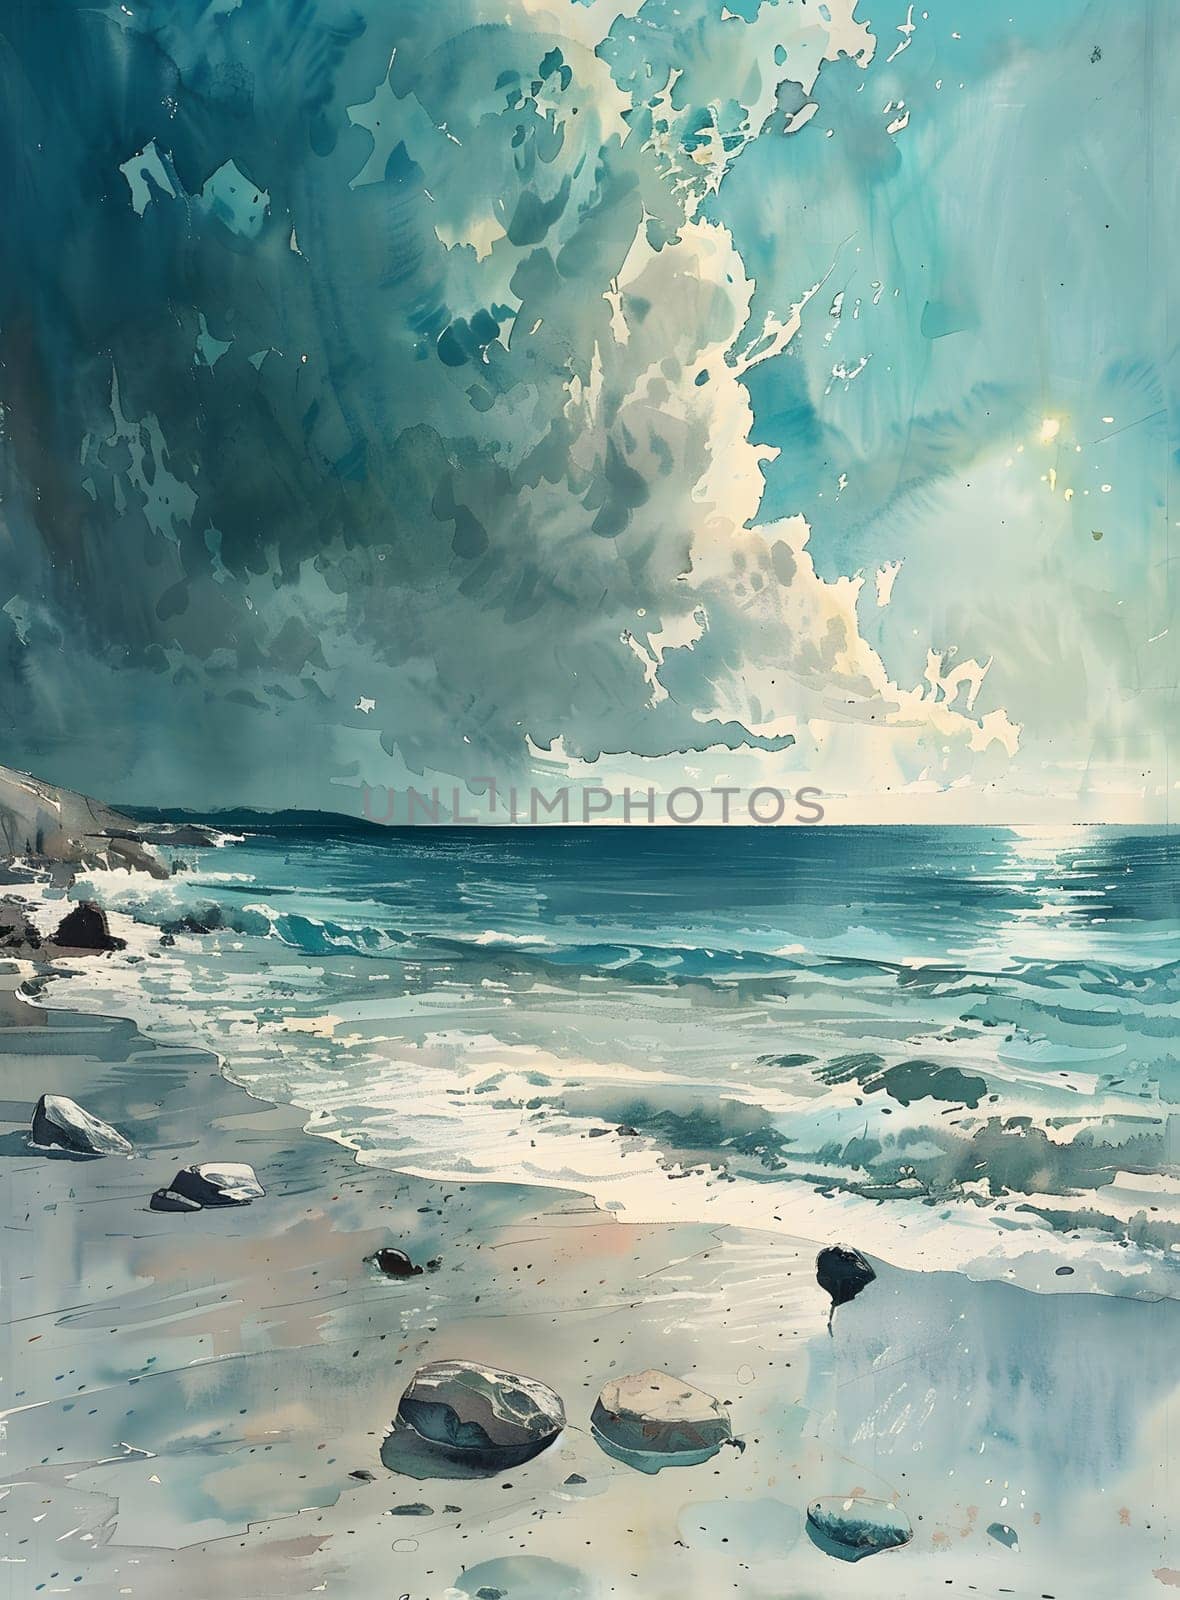 A stunning piece of art depicting a beach on a cloudy day, with a dramatic sky filled with cumulus clouds reflecting on the tranquil water, blending the natural landscape with fluidity